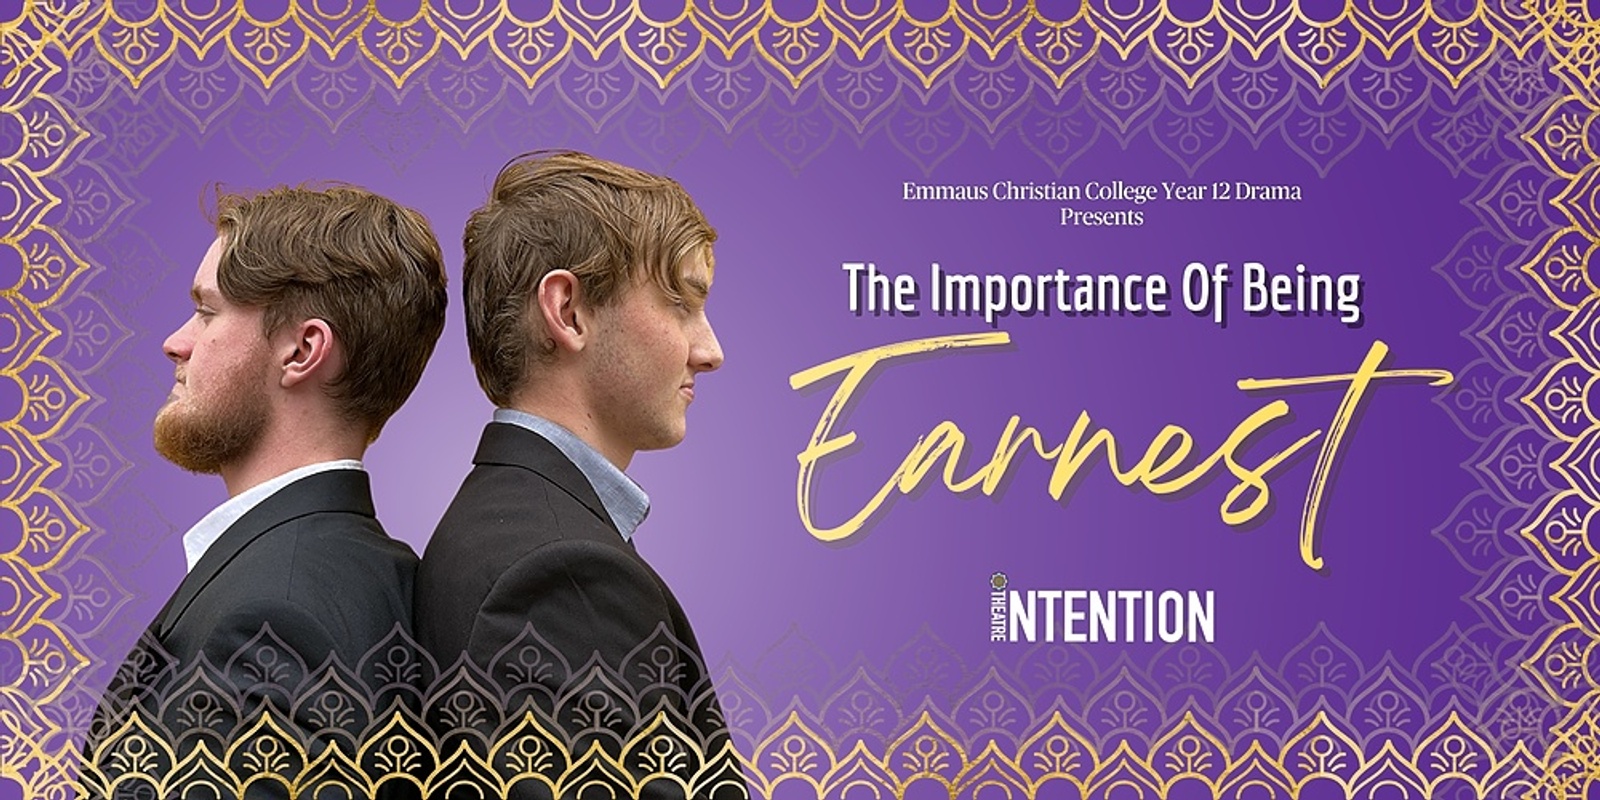 Banner image for The Importance of Being Earnest